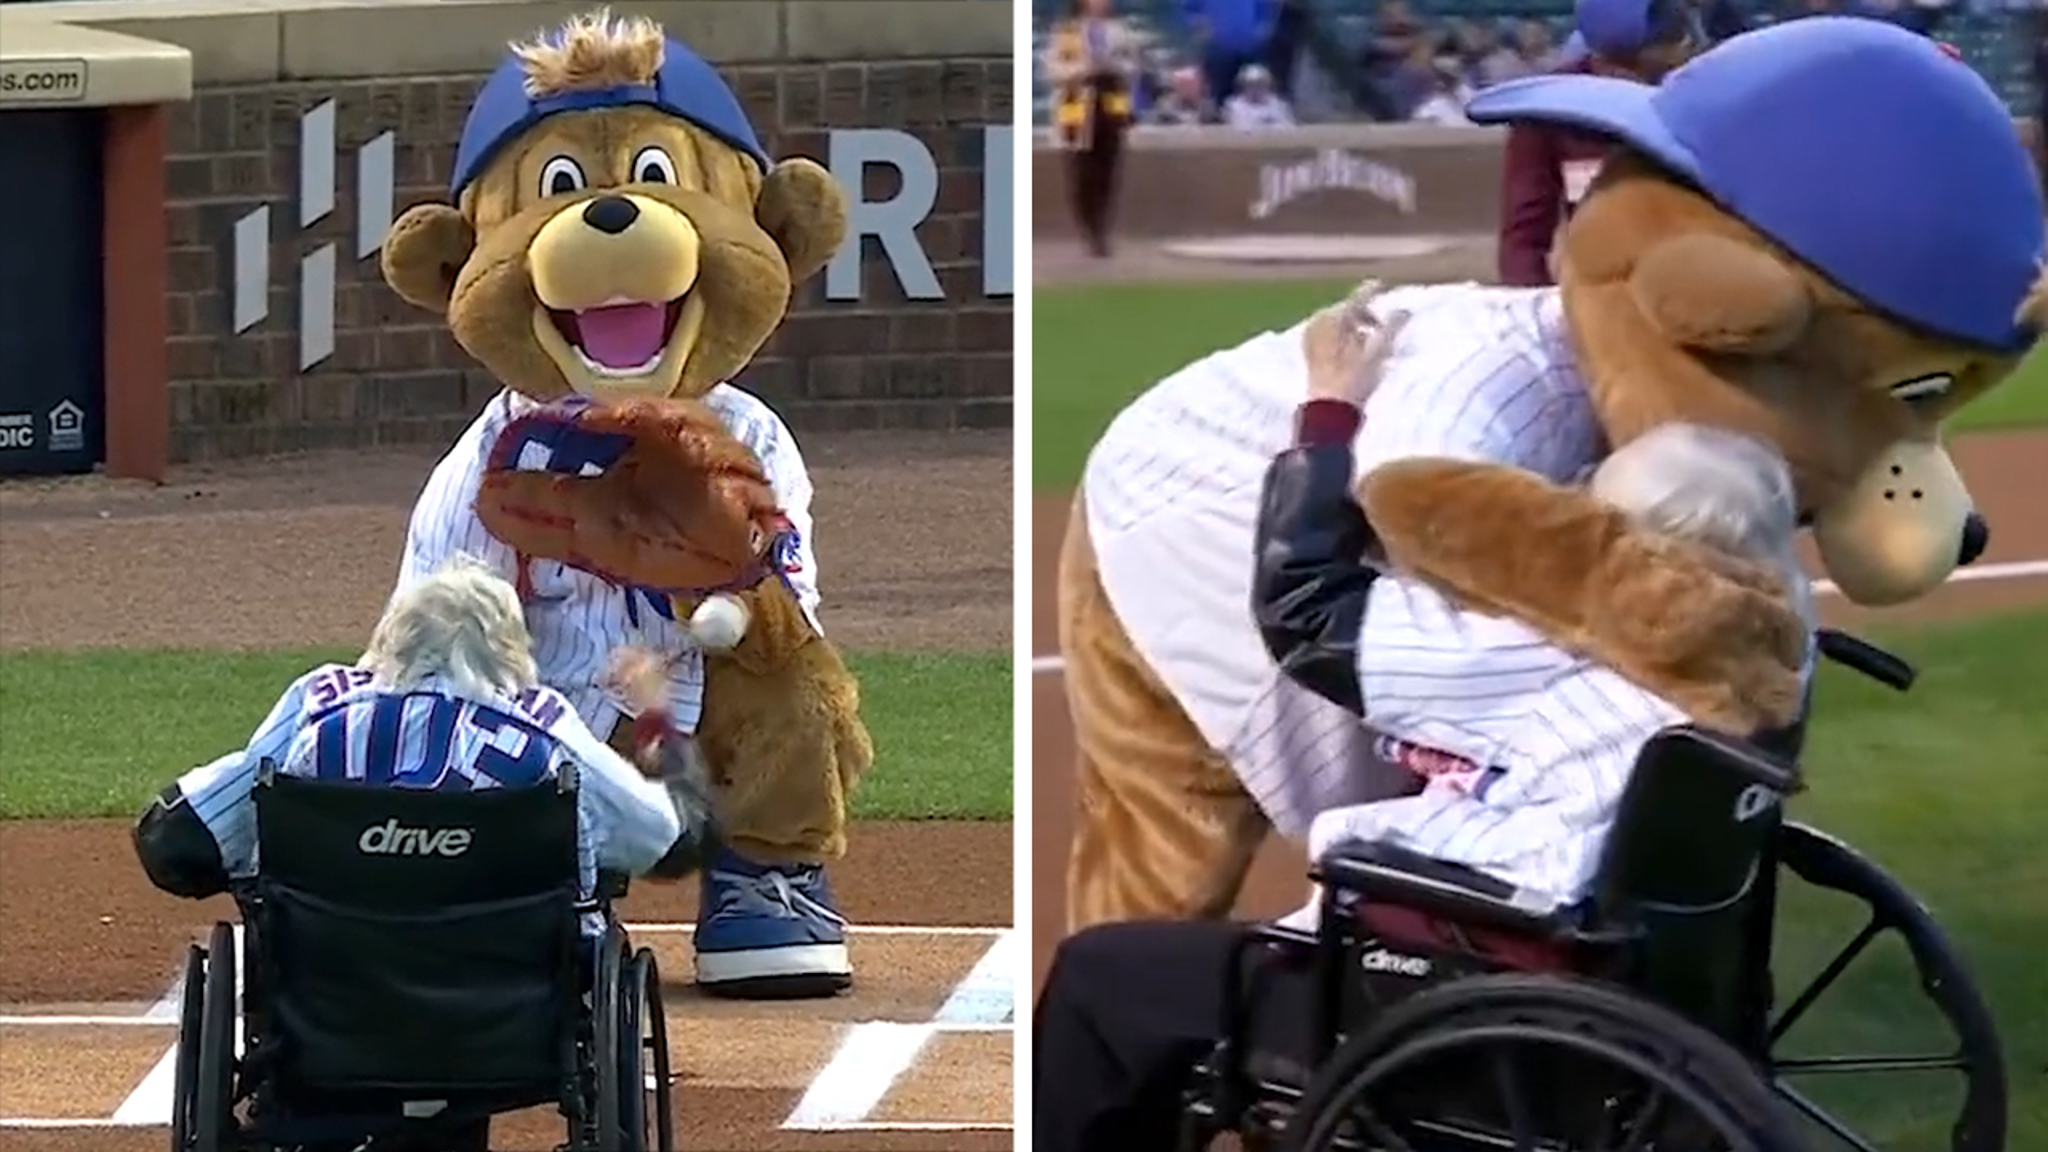 This old Cub still has pull with fans, friends